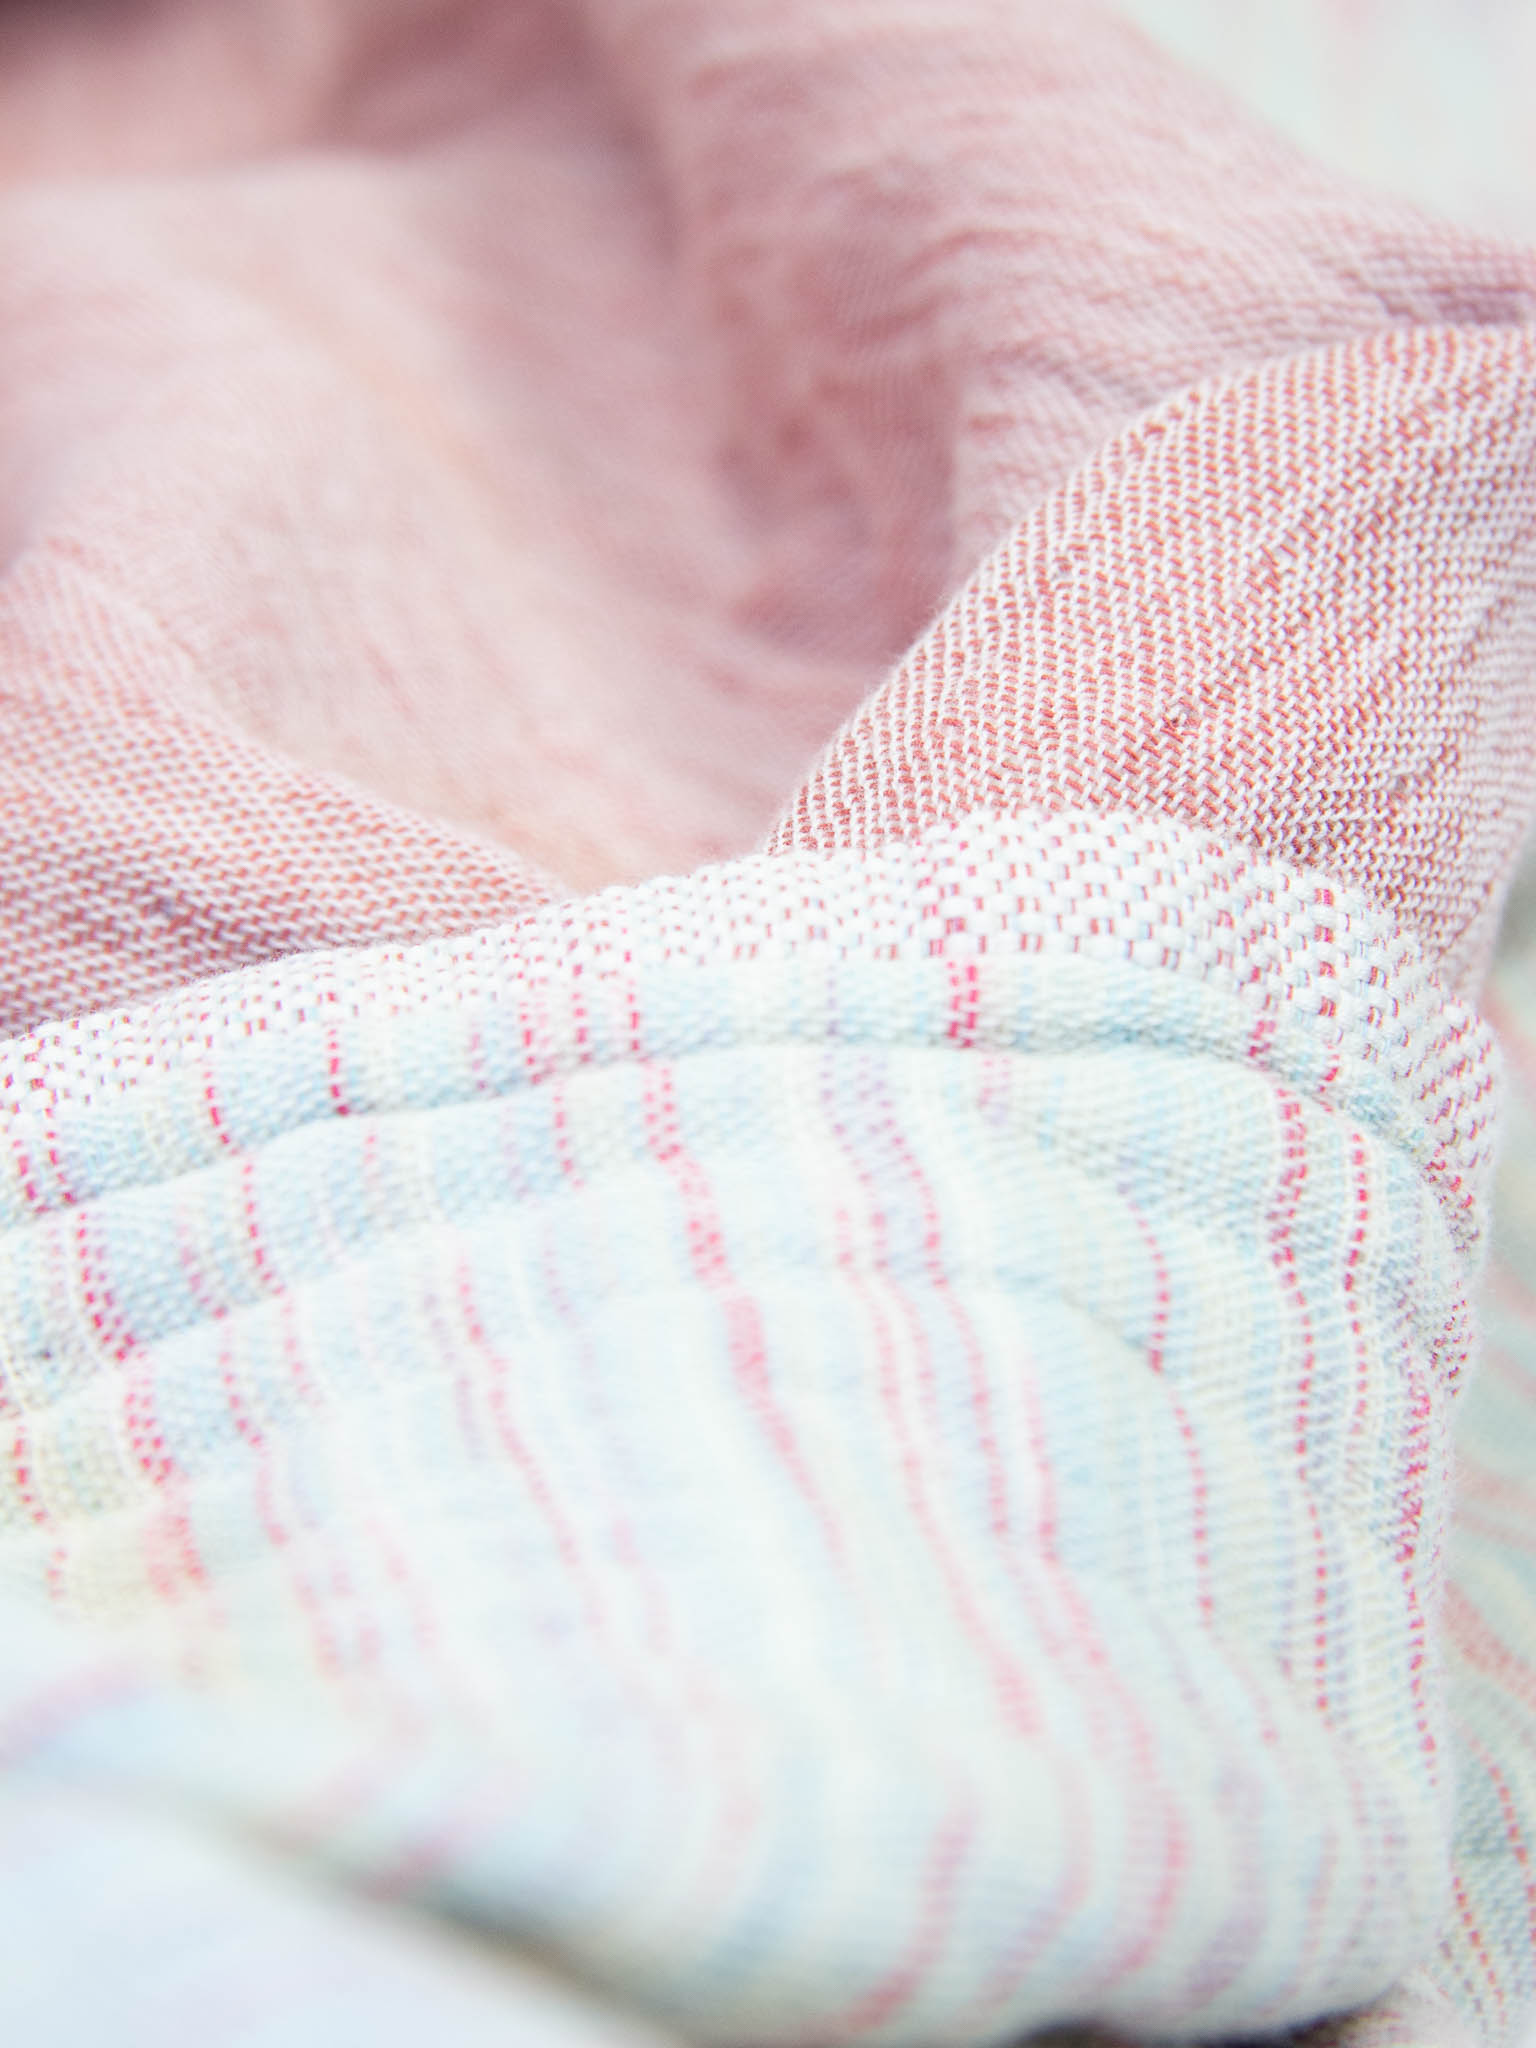 Pink patterned, double sided, beach towel close up